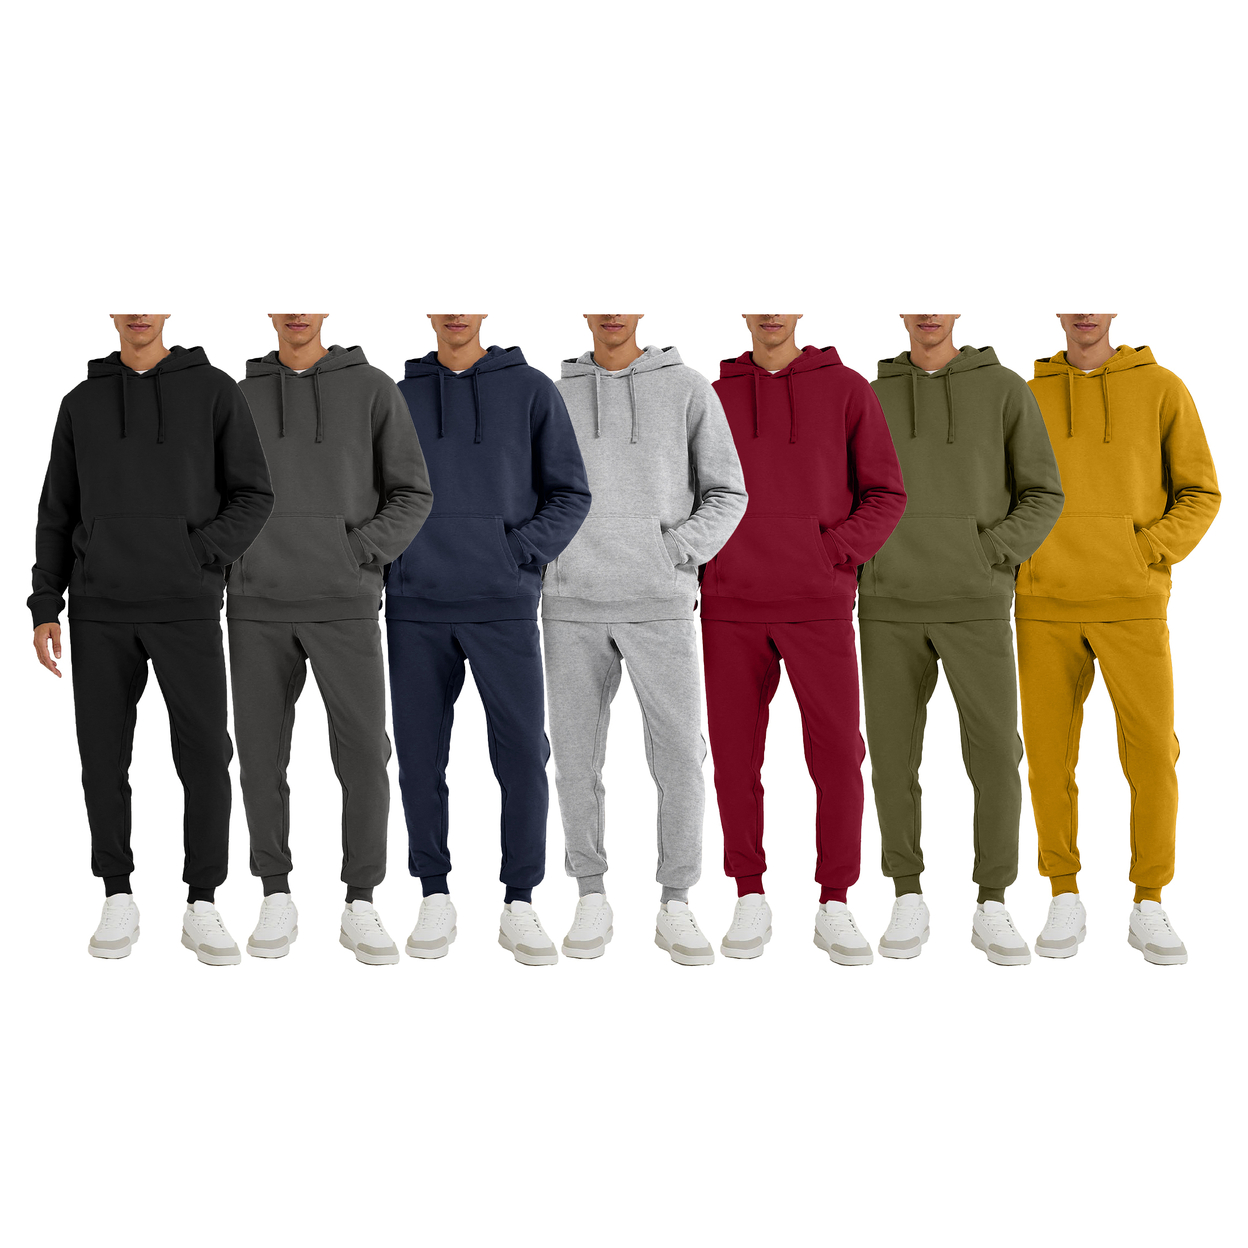 Multi-Pack: Men's Big & Tall Athletic Active Jogging Winter Warm Fleece Lined Pullover Tracksuit Set - Grey, 1-pack, X-large